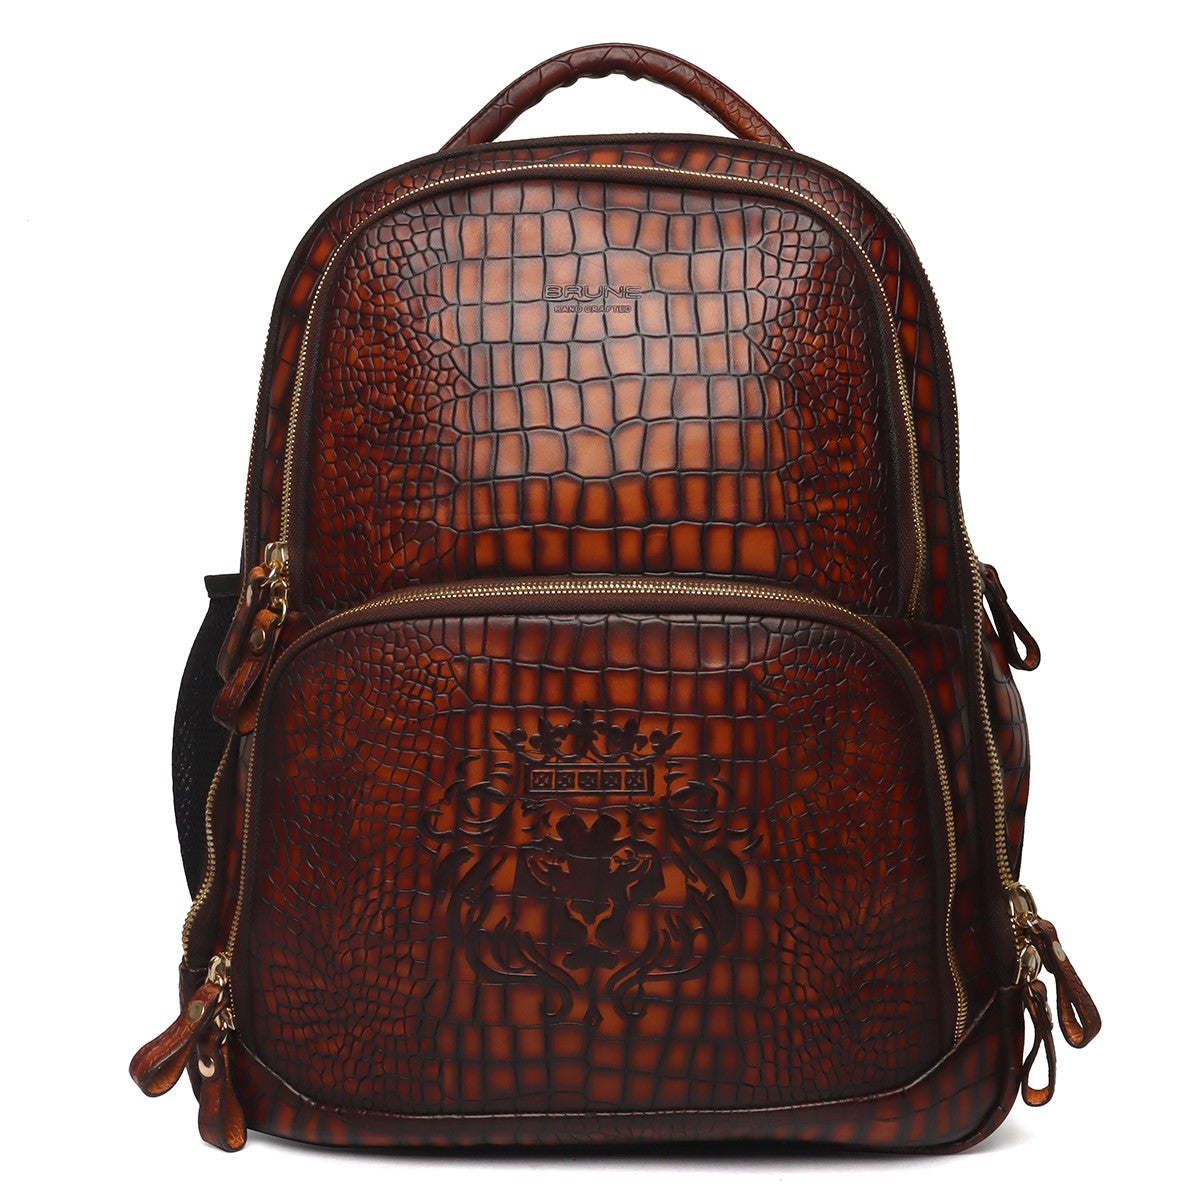 Hand Painted Leather Backpack in Cognac Smokey Finish by Brune & Bareskin